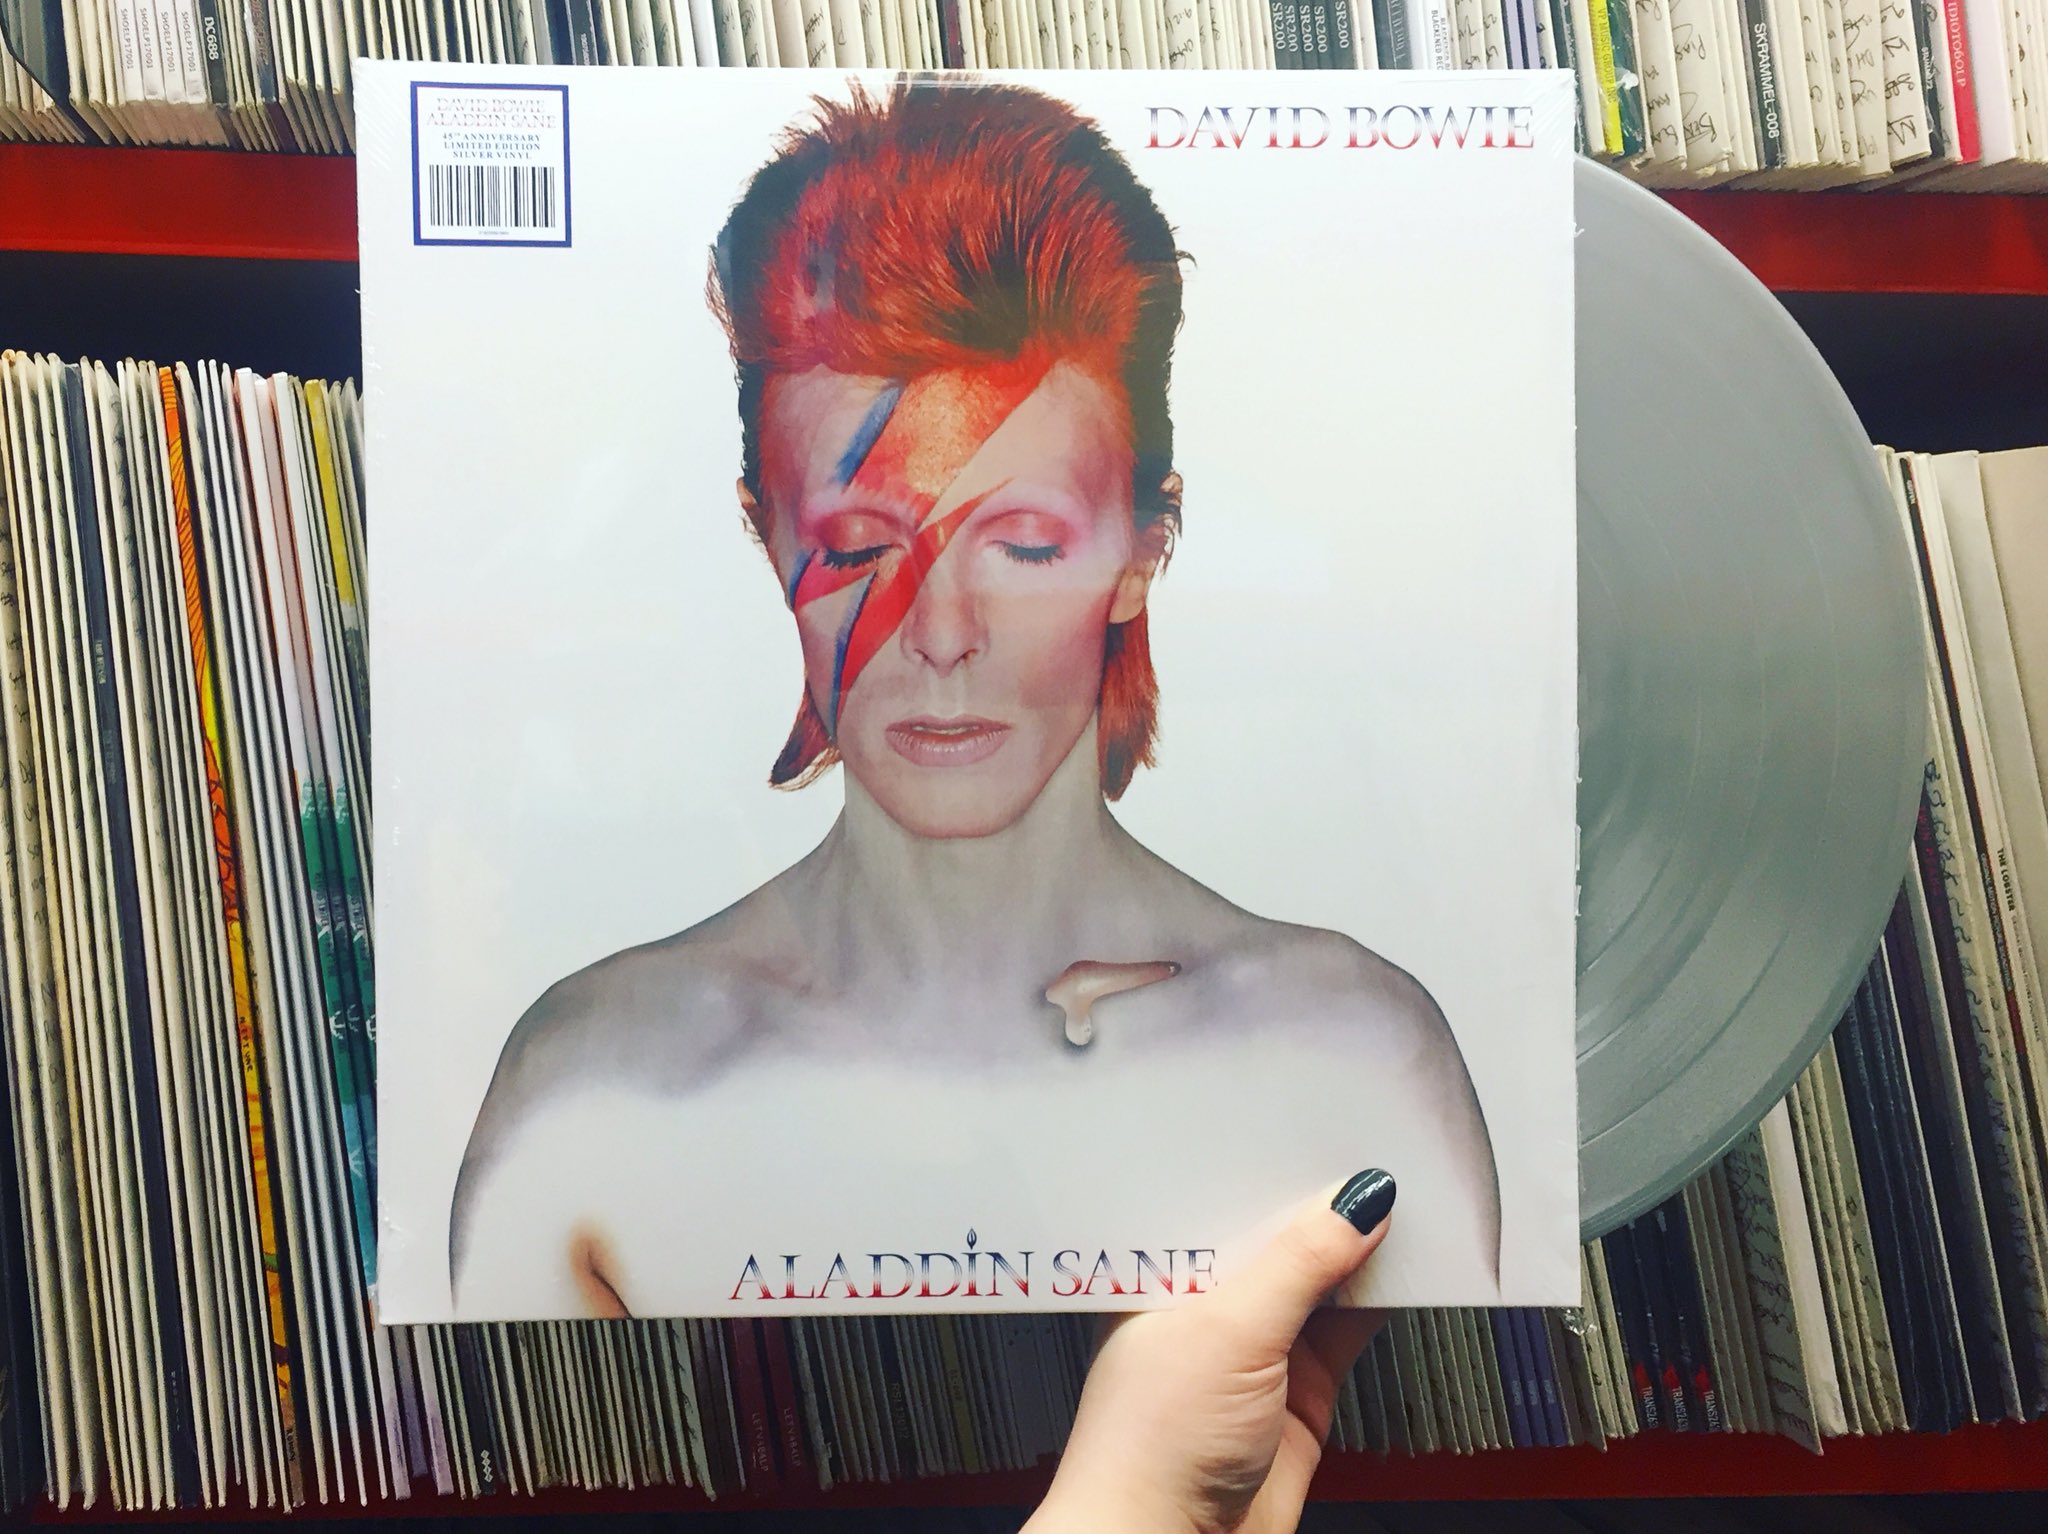 Indkøbscenter Forskellige fire gange Vinyl Tap Records on Twitter: "Out this Friday: David Bowie - Aladdin Sane  45th anniversary on limited edition silver vinyl. This item is IN STORE  ONLY and WILL NOT be available online. #